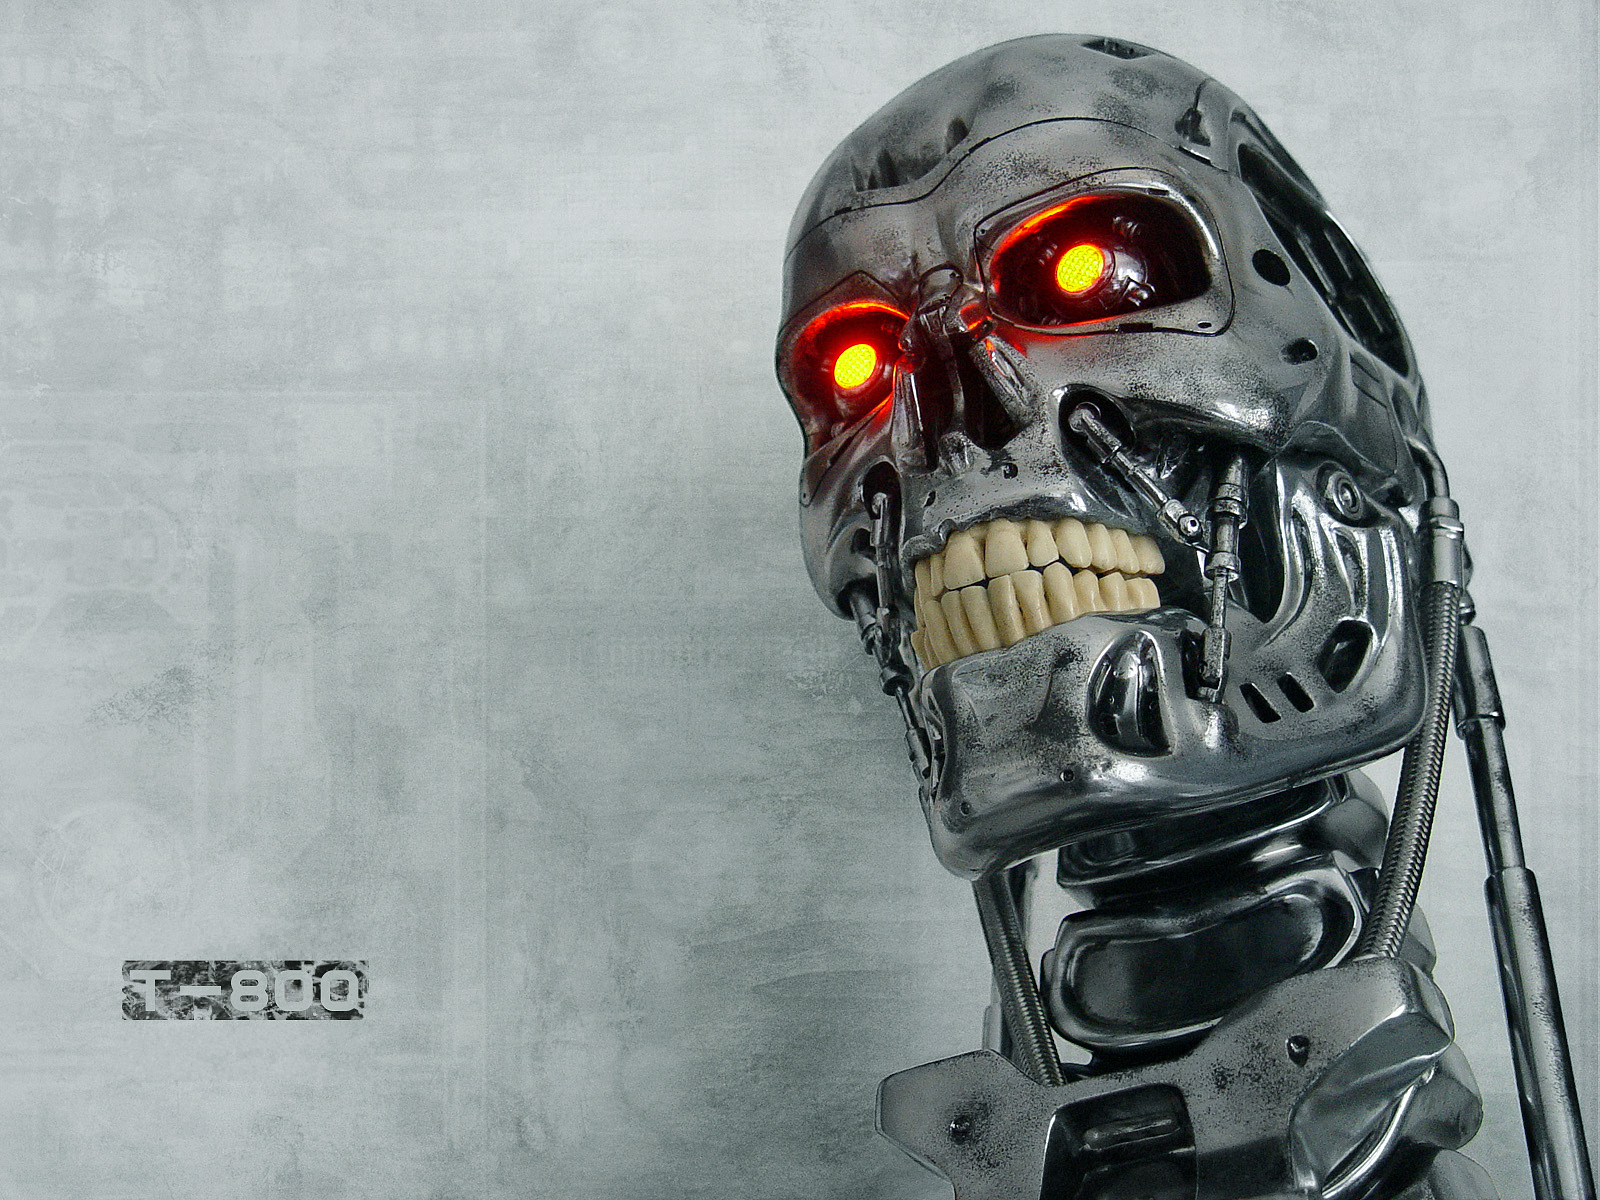 Awesome HD Robot Wallpapers amp Backgrounds For Free Download